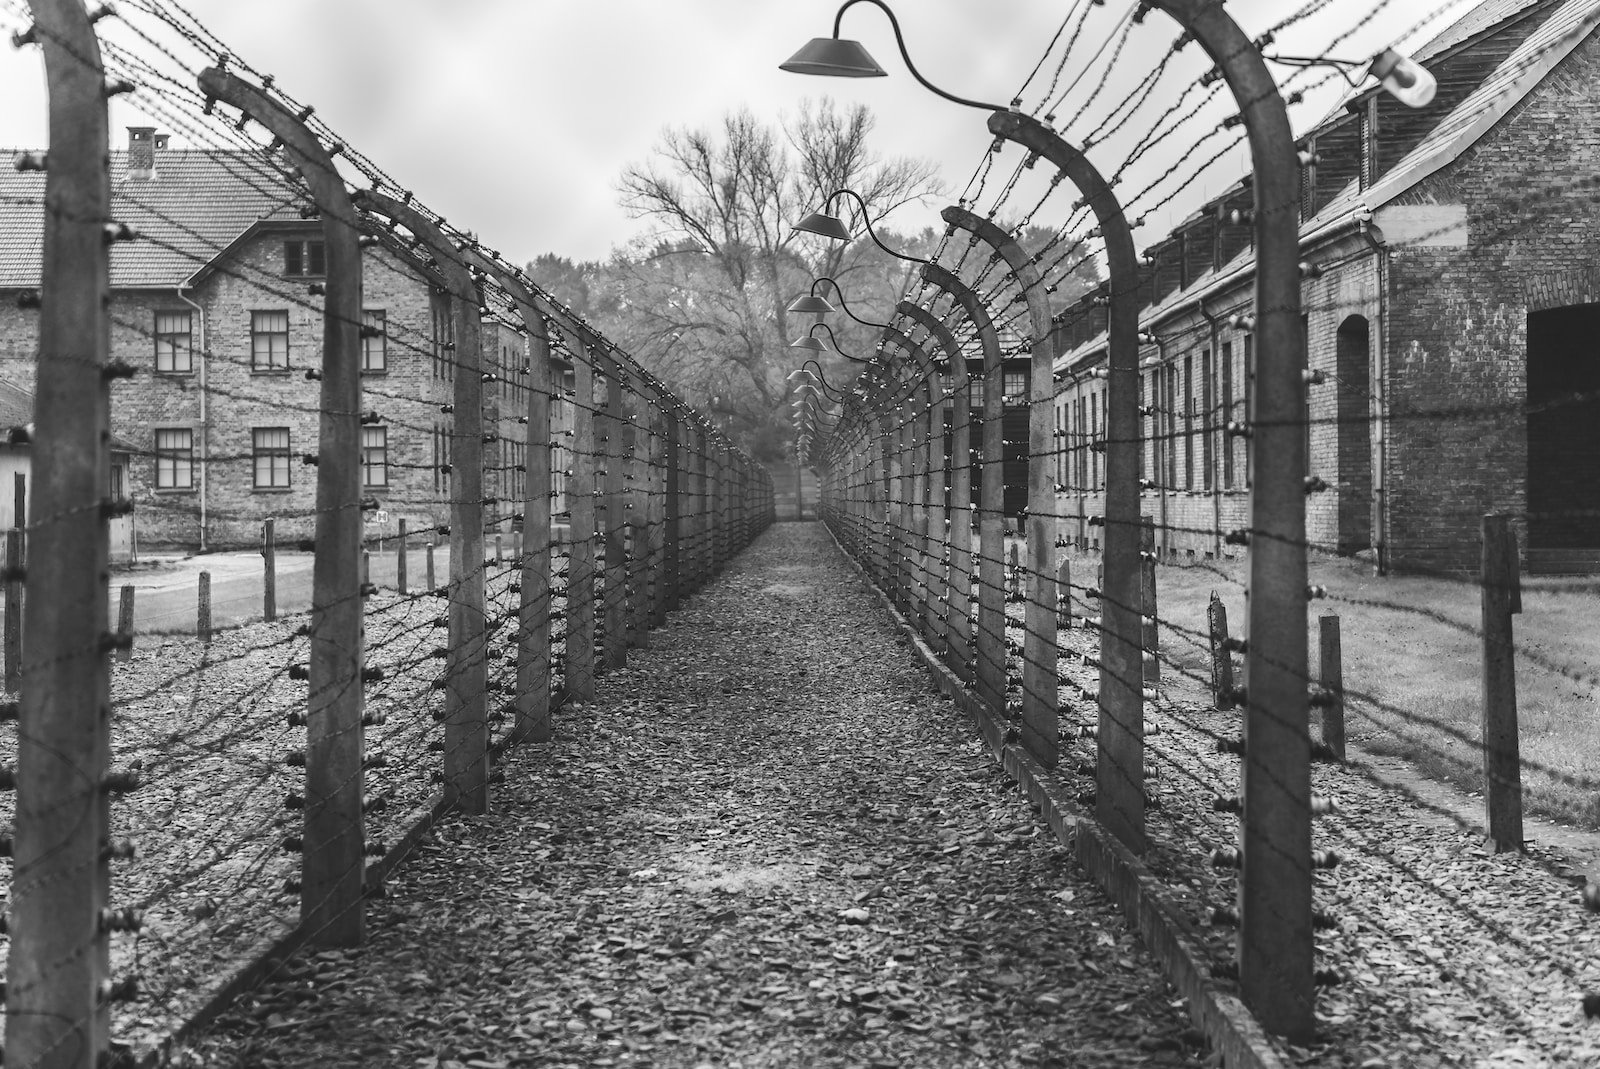 Holocaust remembrance: beware ‘siren songs of hate’ – UN chief